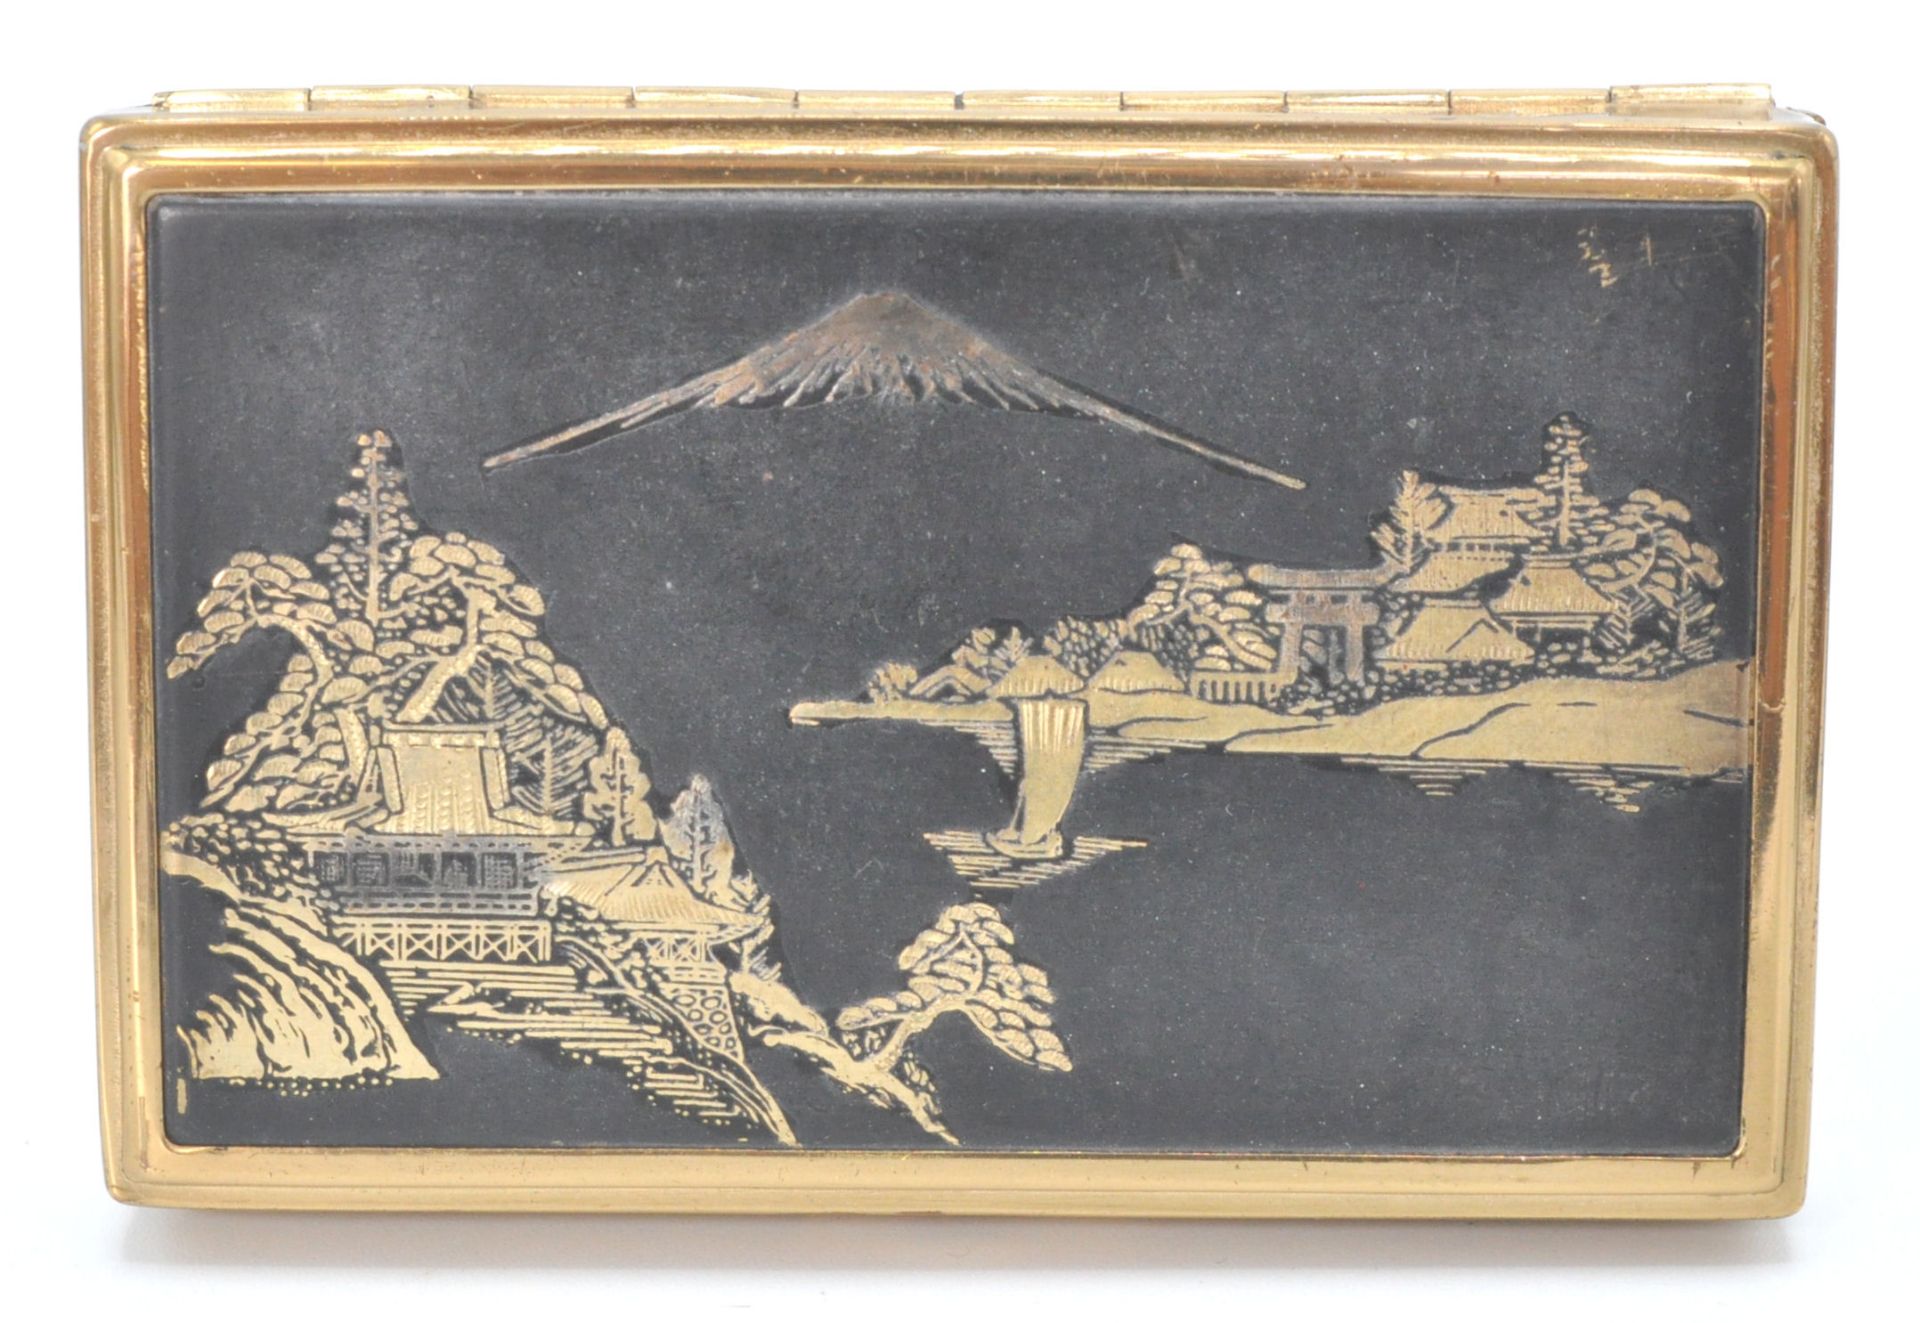 A good vintage 20th Century musical compact by B.S.B having a Japanese scene atop with mount Fuji in - Bild 2 aus 8